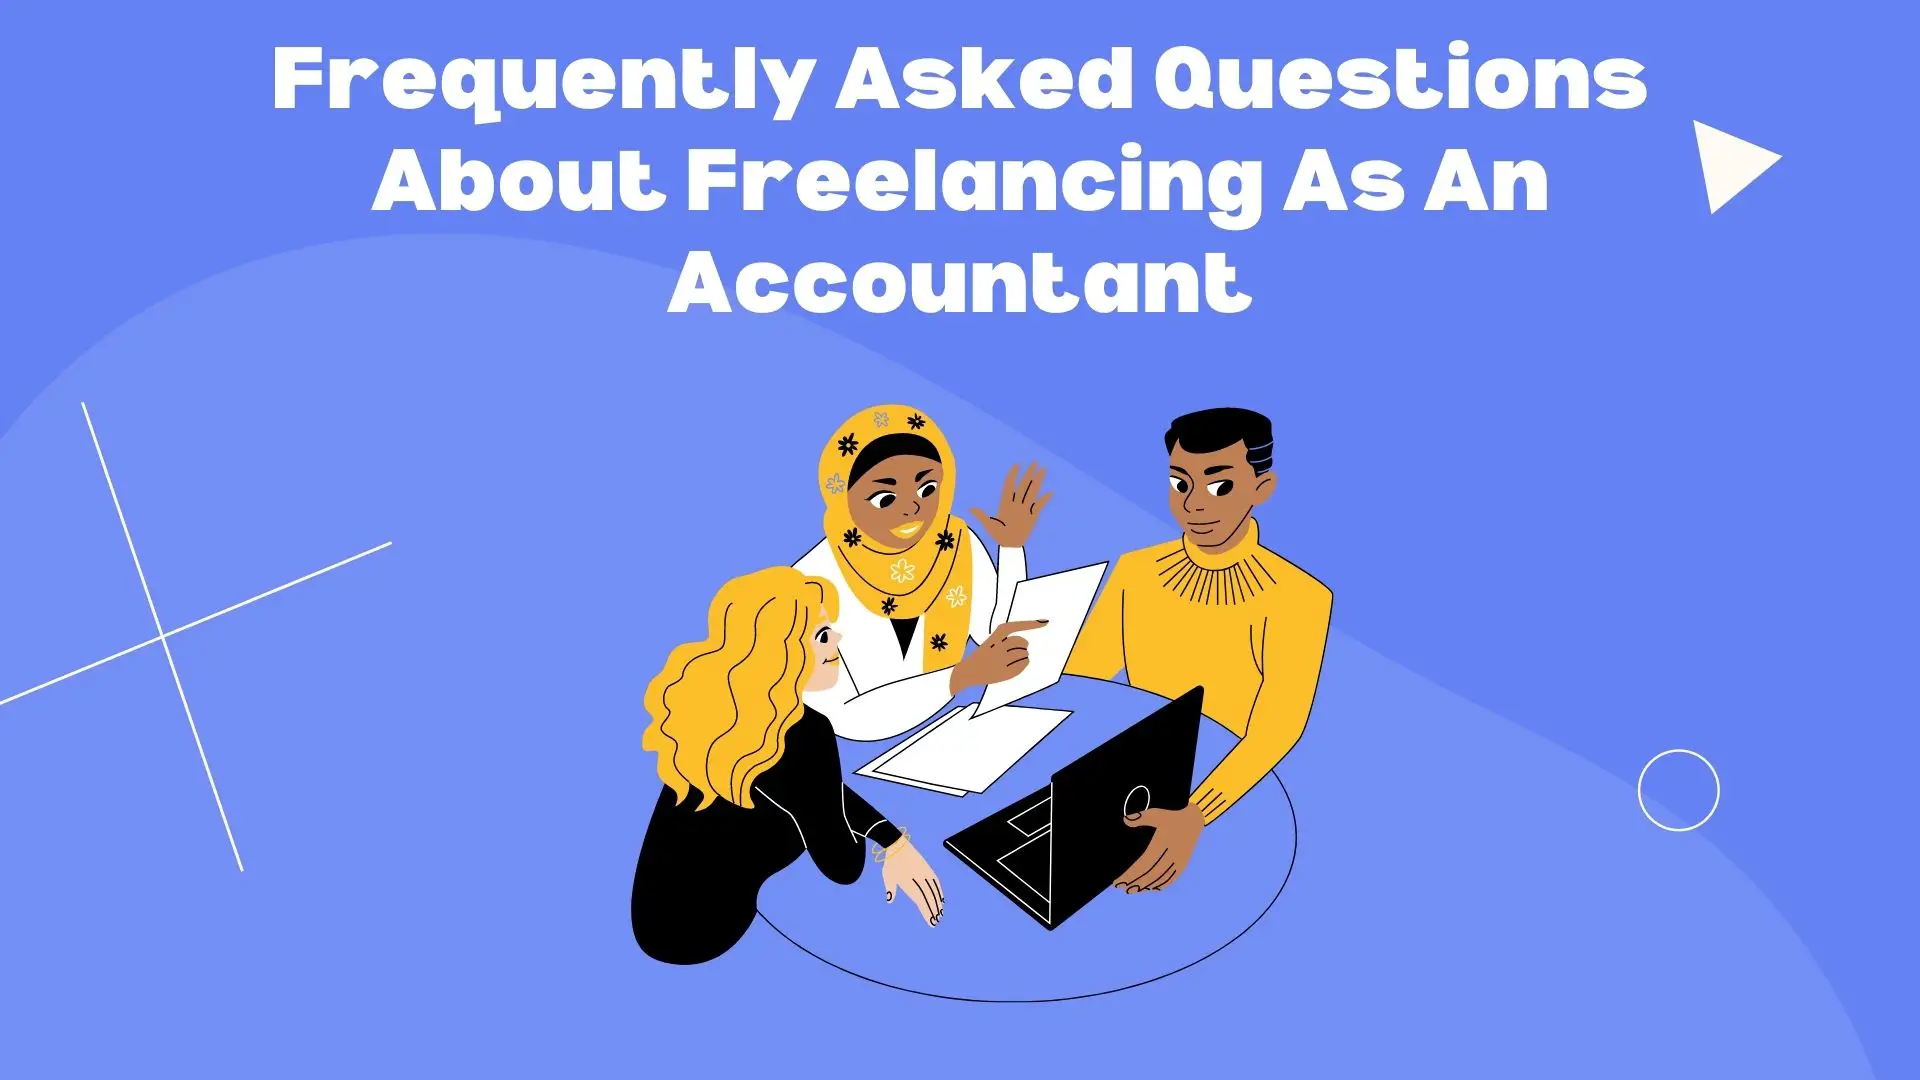 Frequently Asked Questions About Freelancing As An Accountant